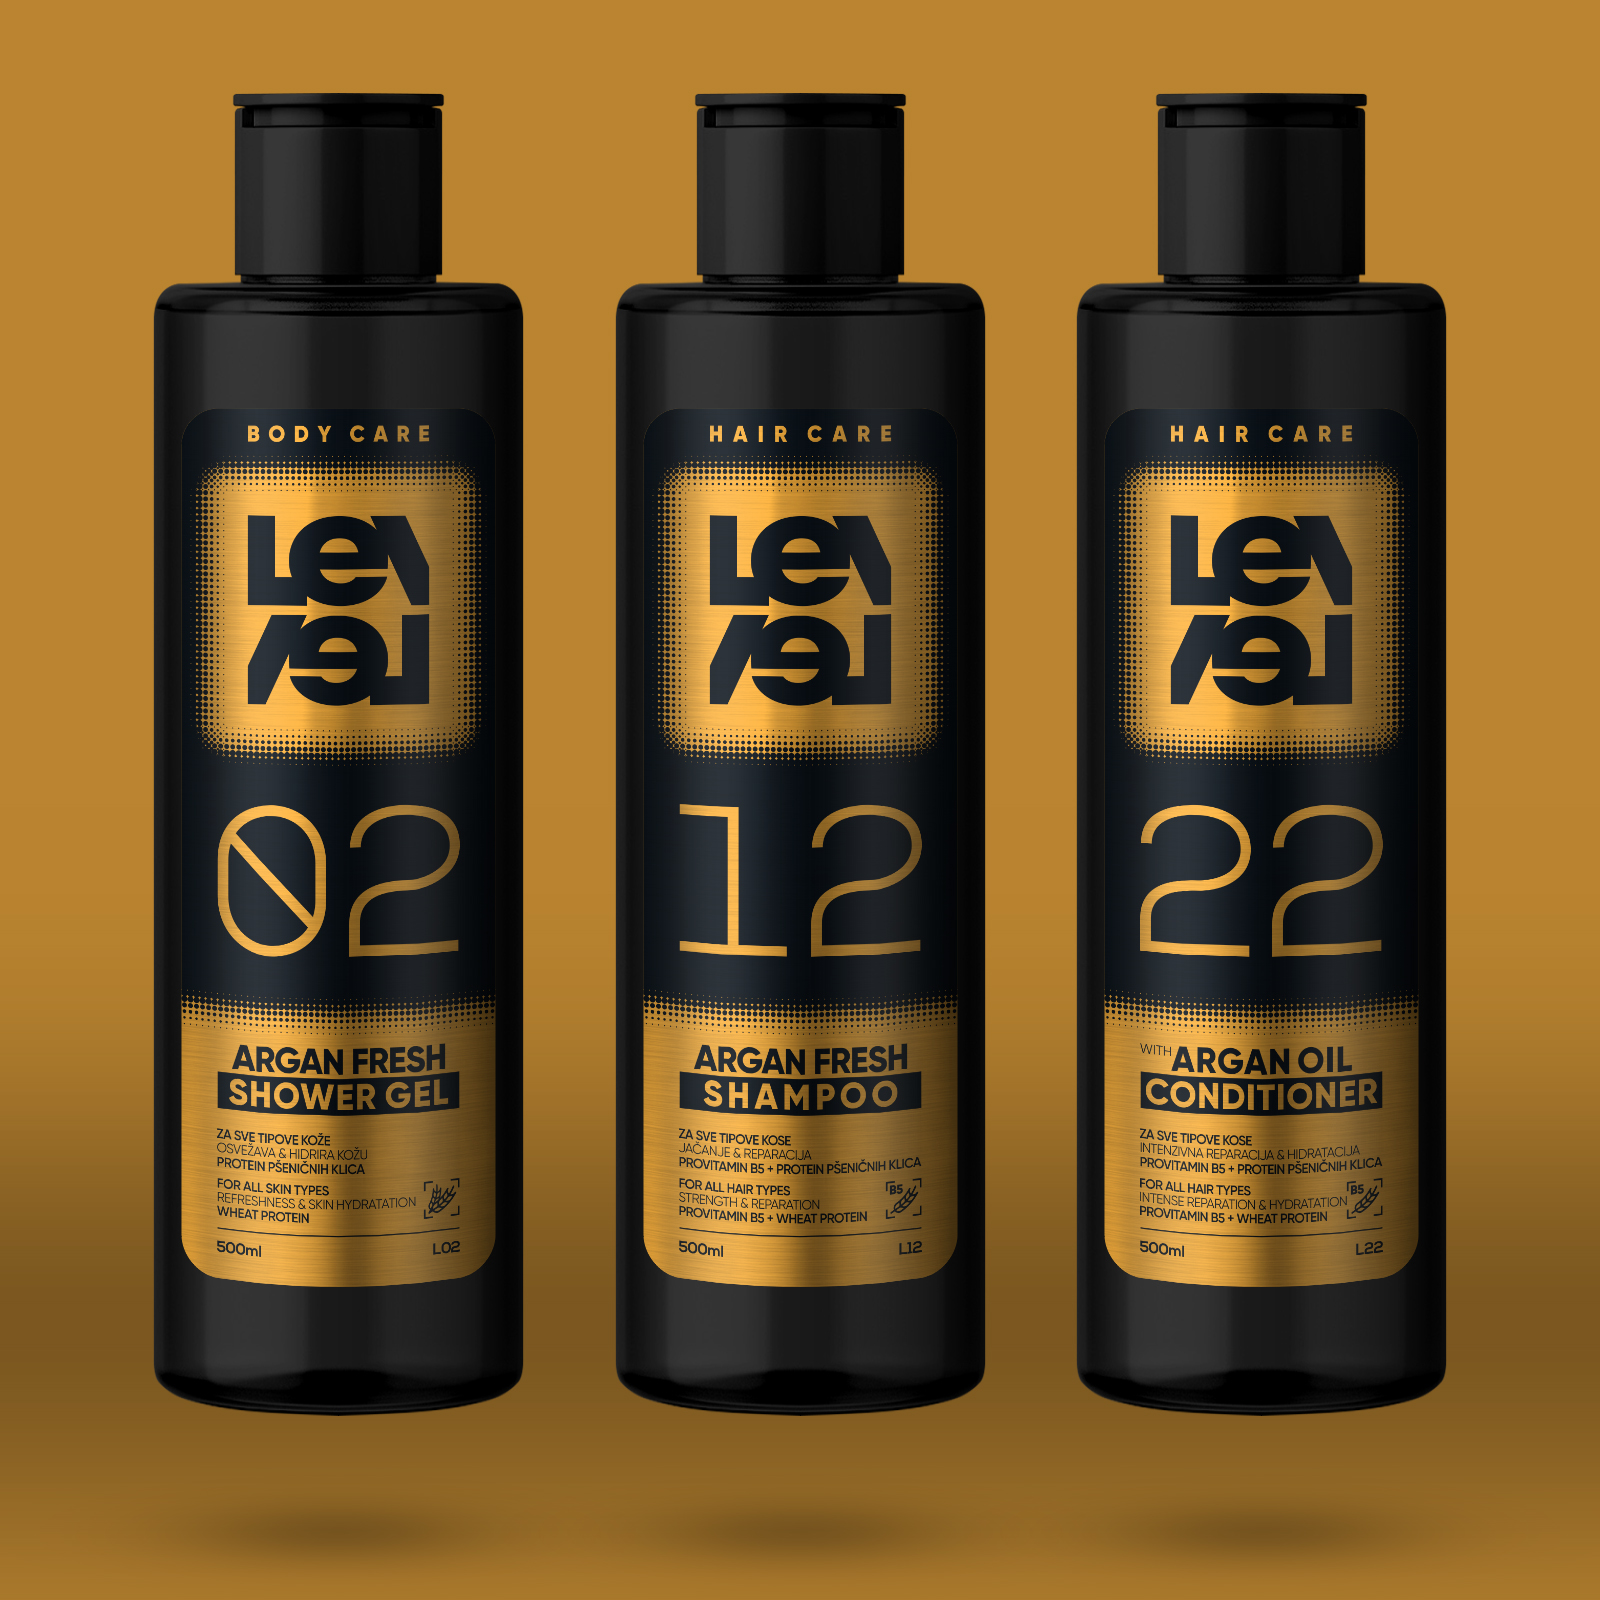 New Brand & Label for Shower Gels, Shampoos & Conditioners from Serbia